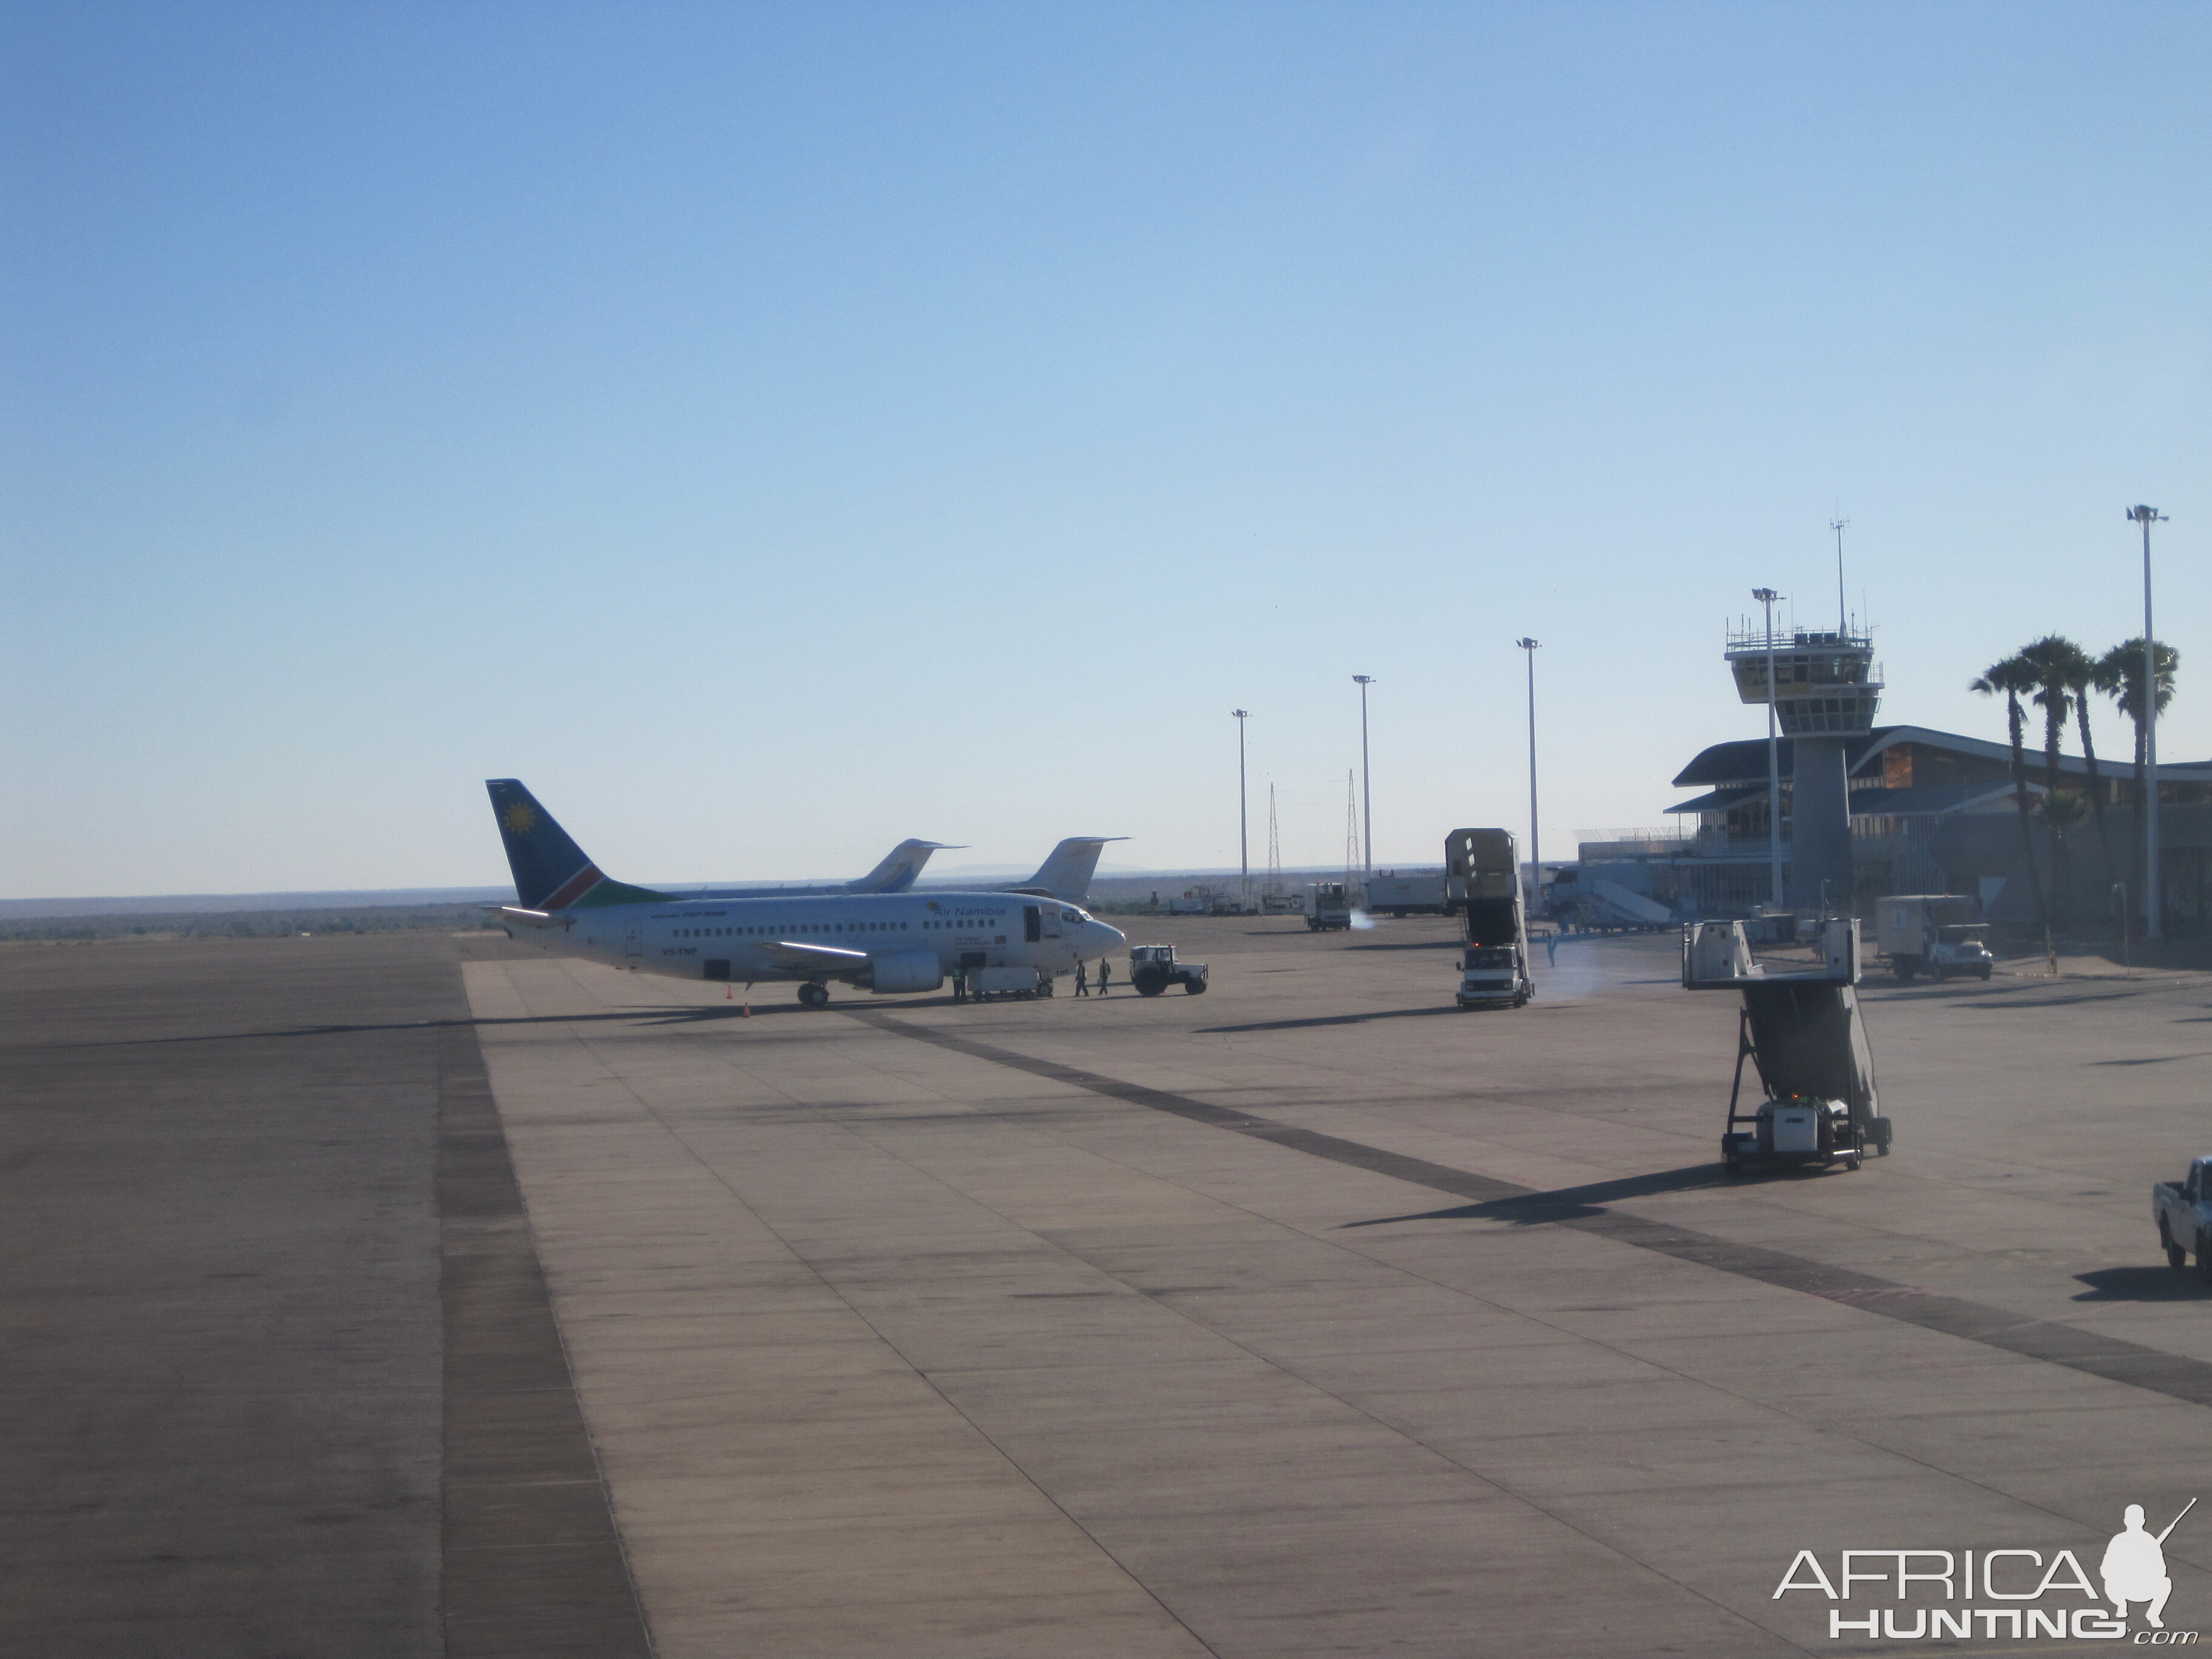 Tarmac arrival at the International Airport in Windhoek, Namibia